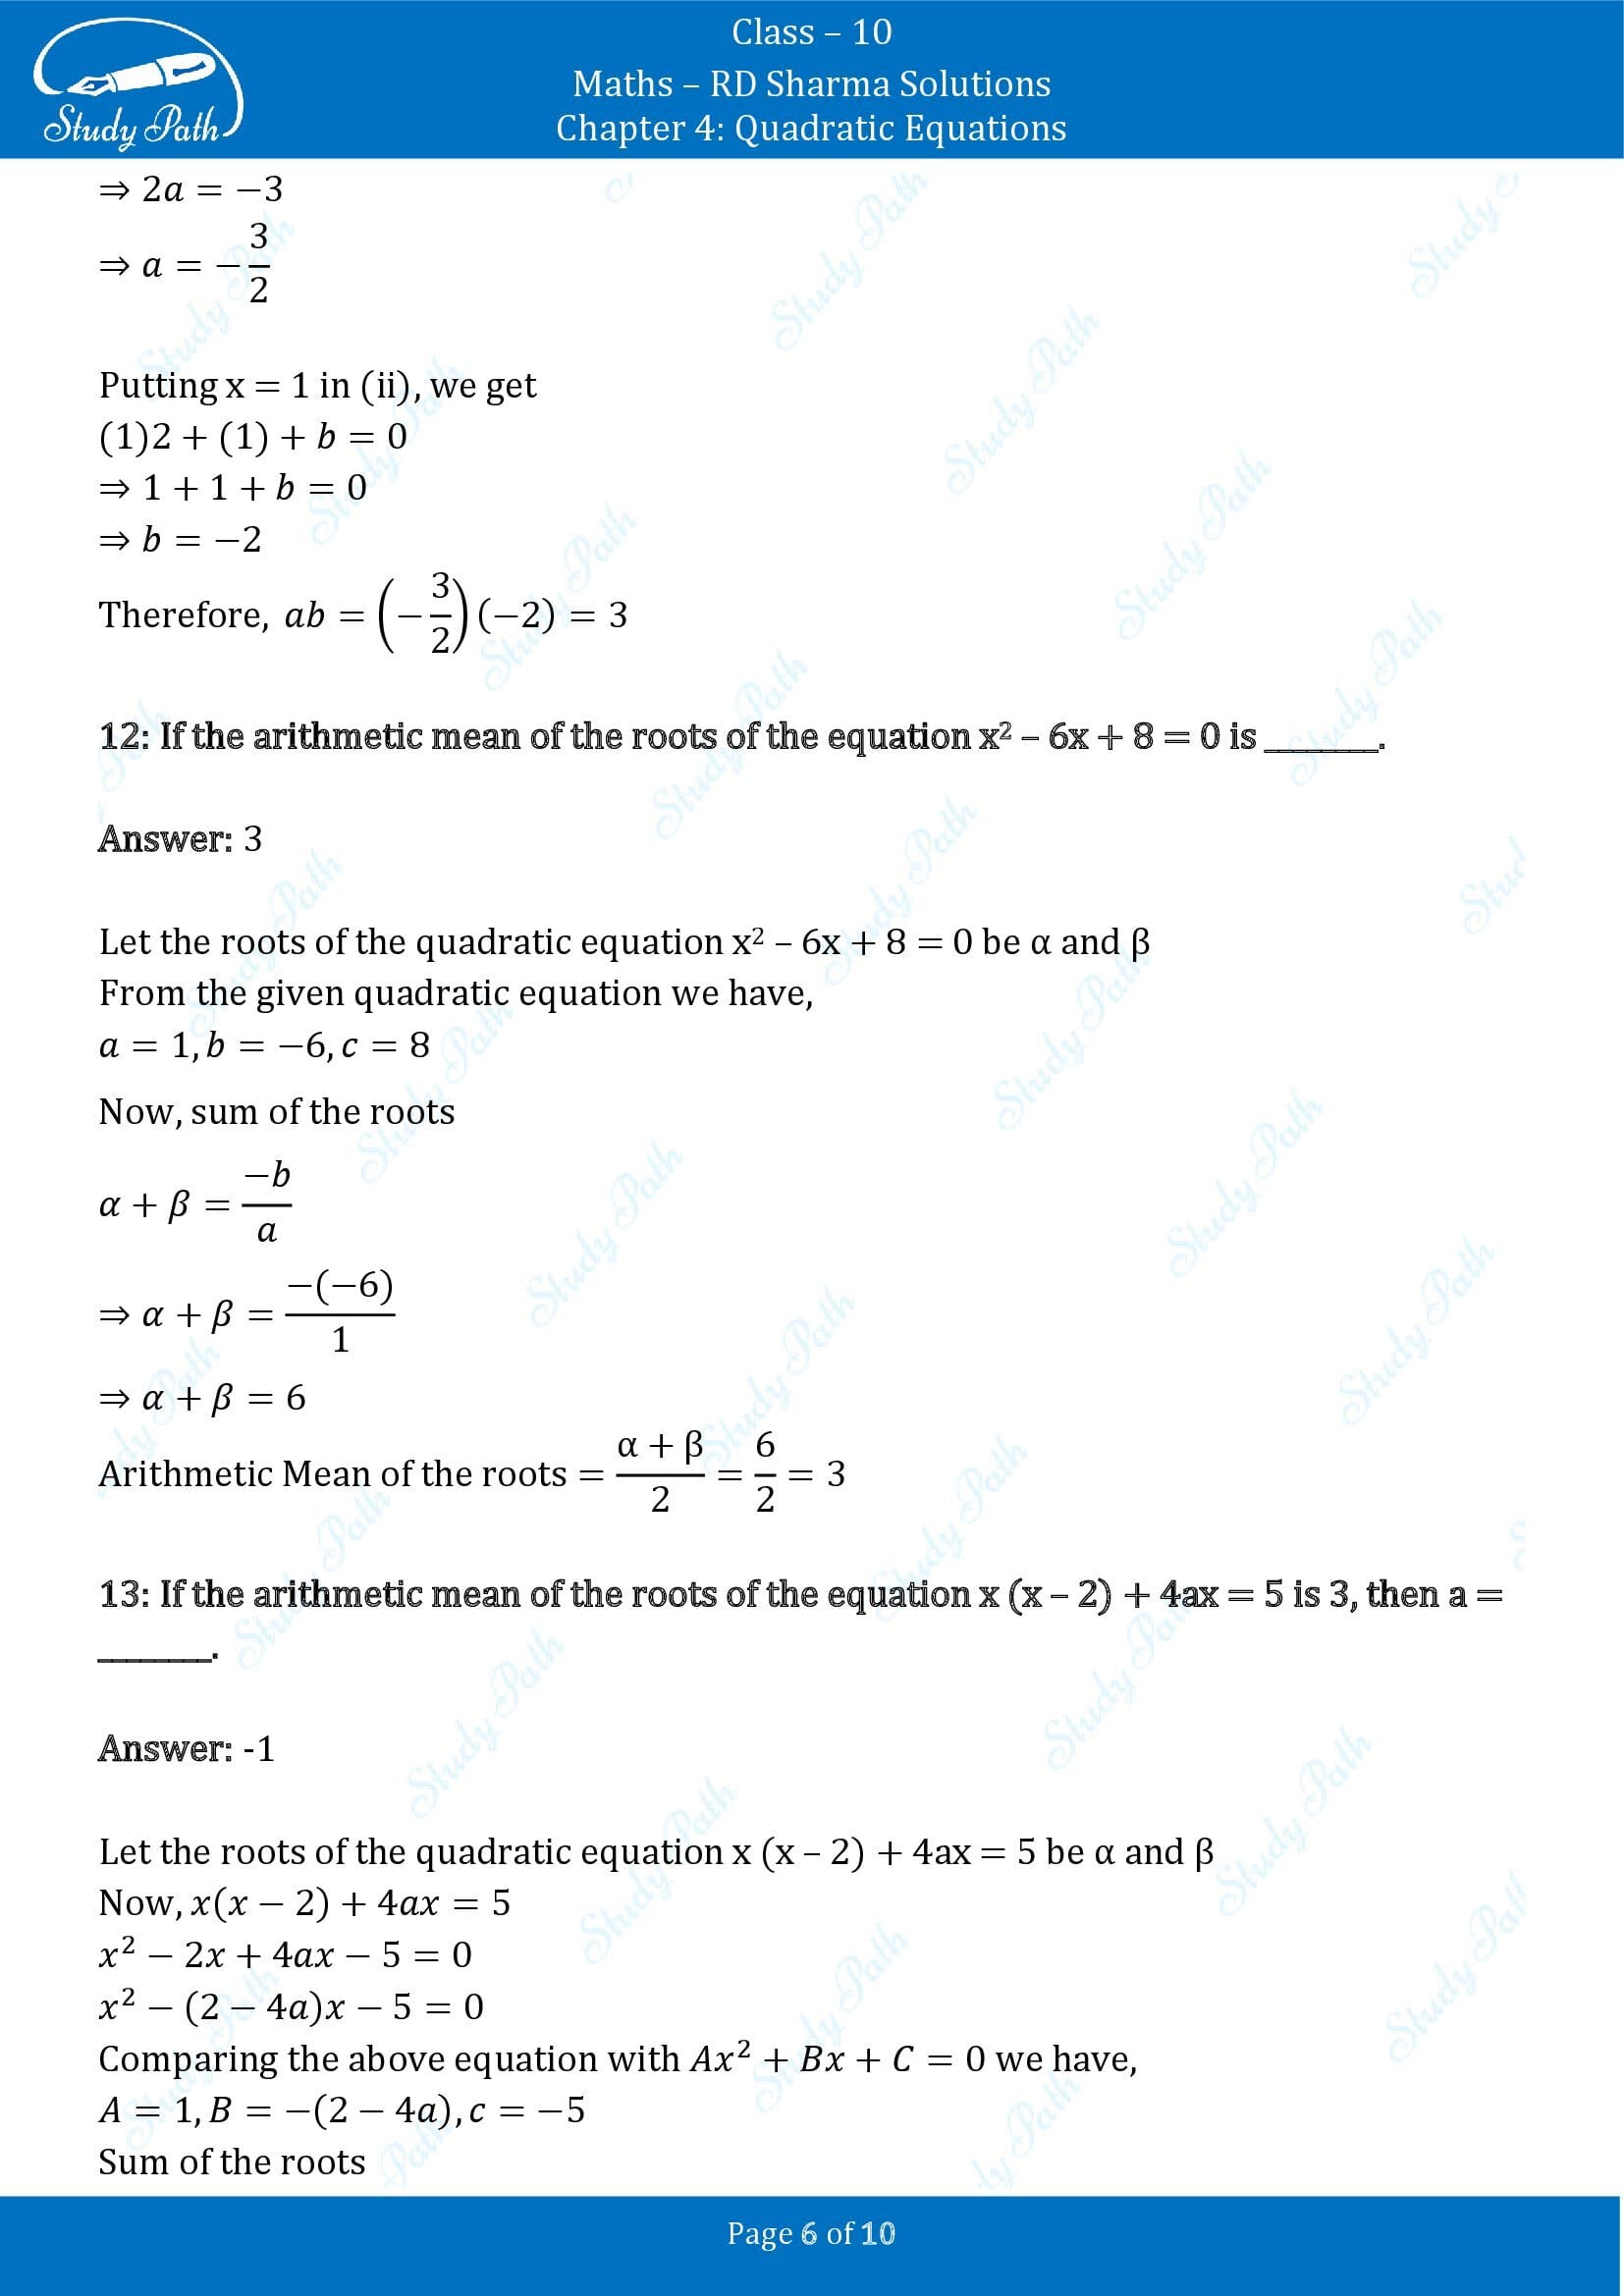 RD Sharma Solutions Class 10 Chapter 4 Quadratic Equations Fill in the Blank Type Questions FBQs 00006